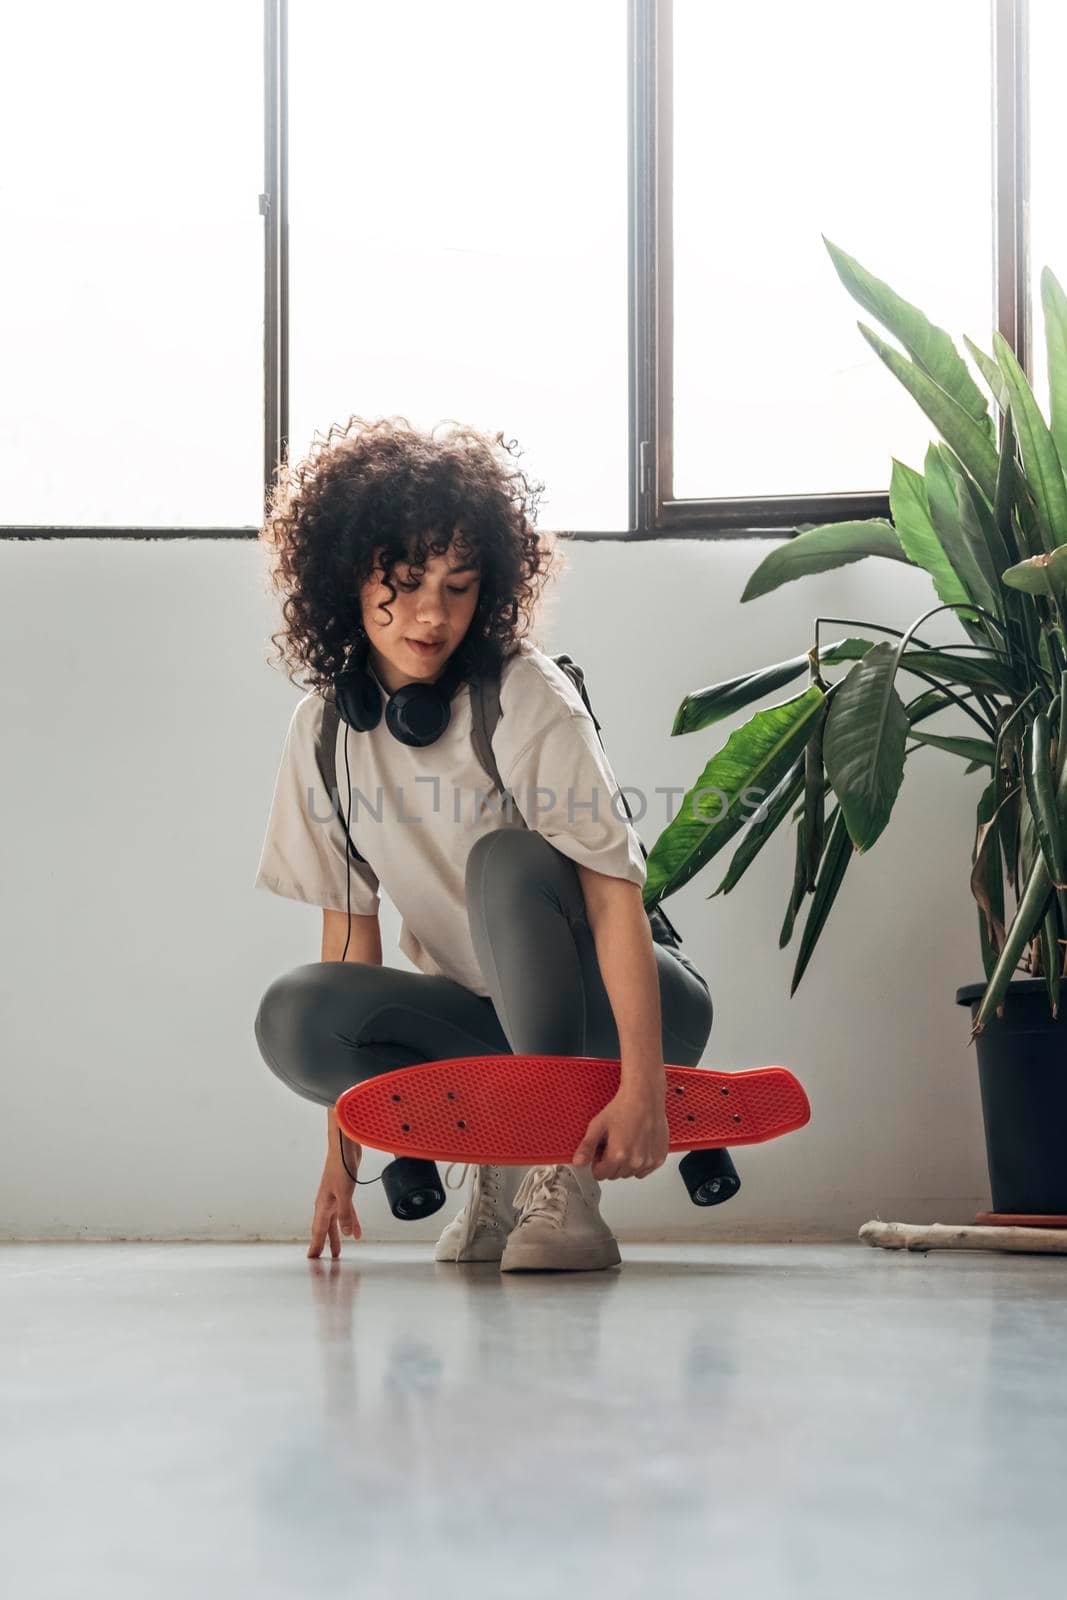 Young multiracial woman with curly hair crouching down holding a red skateboard looking down. by Hoverstock